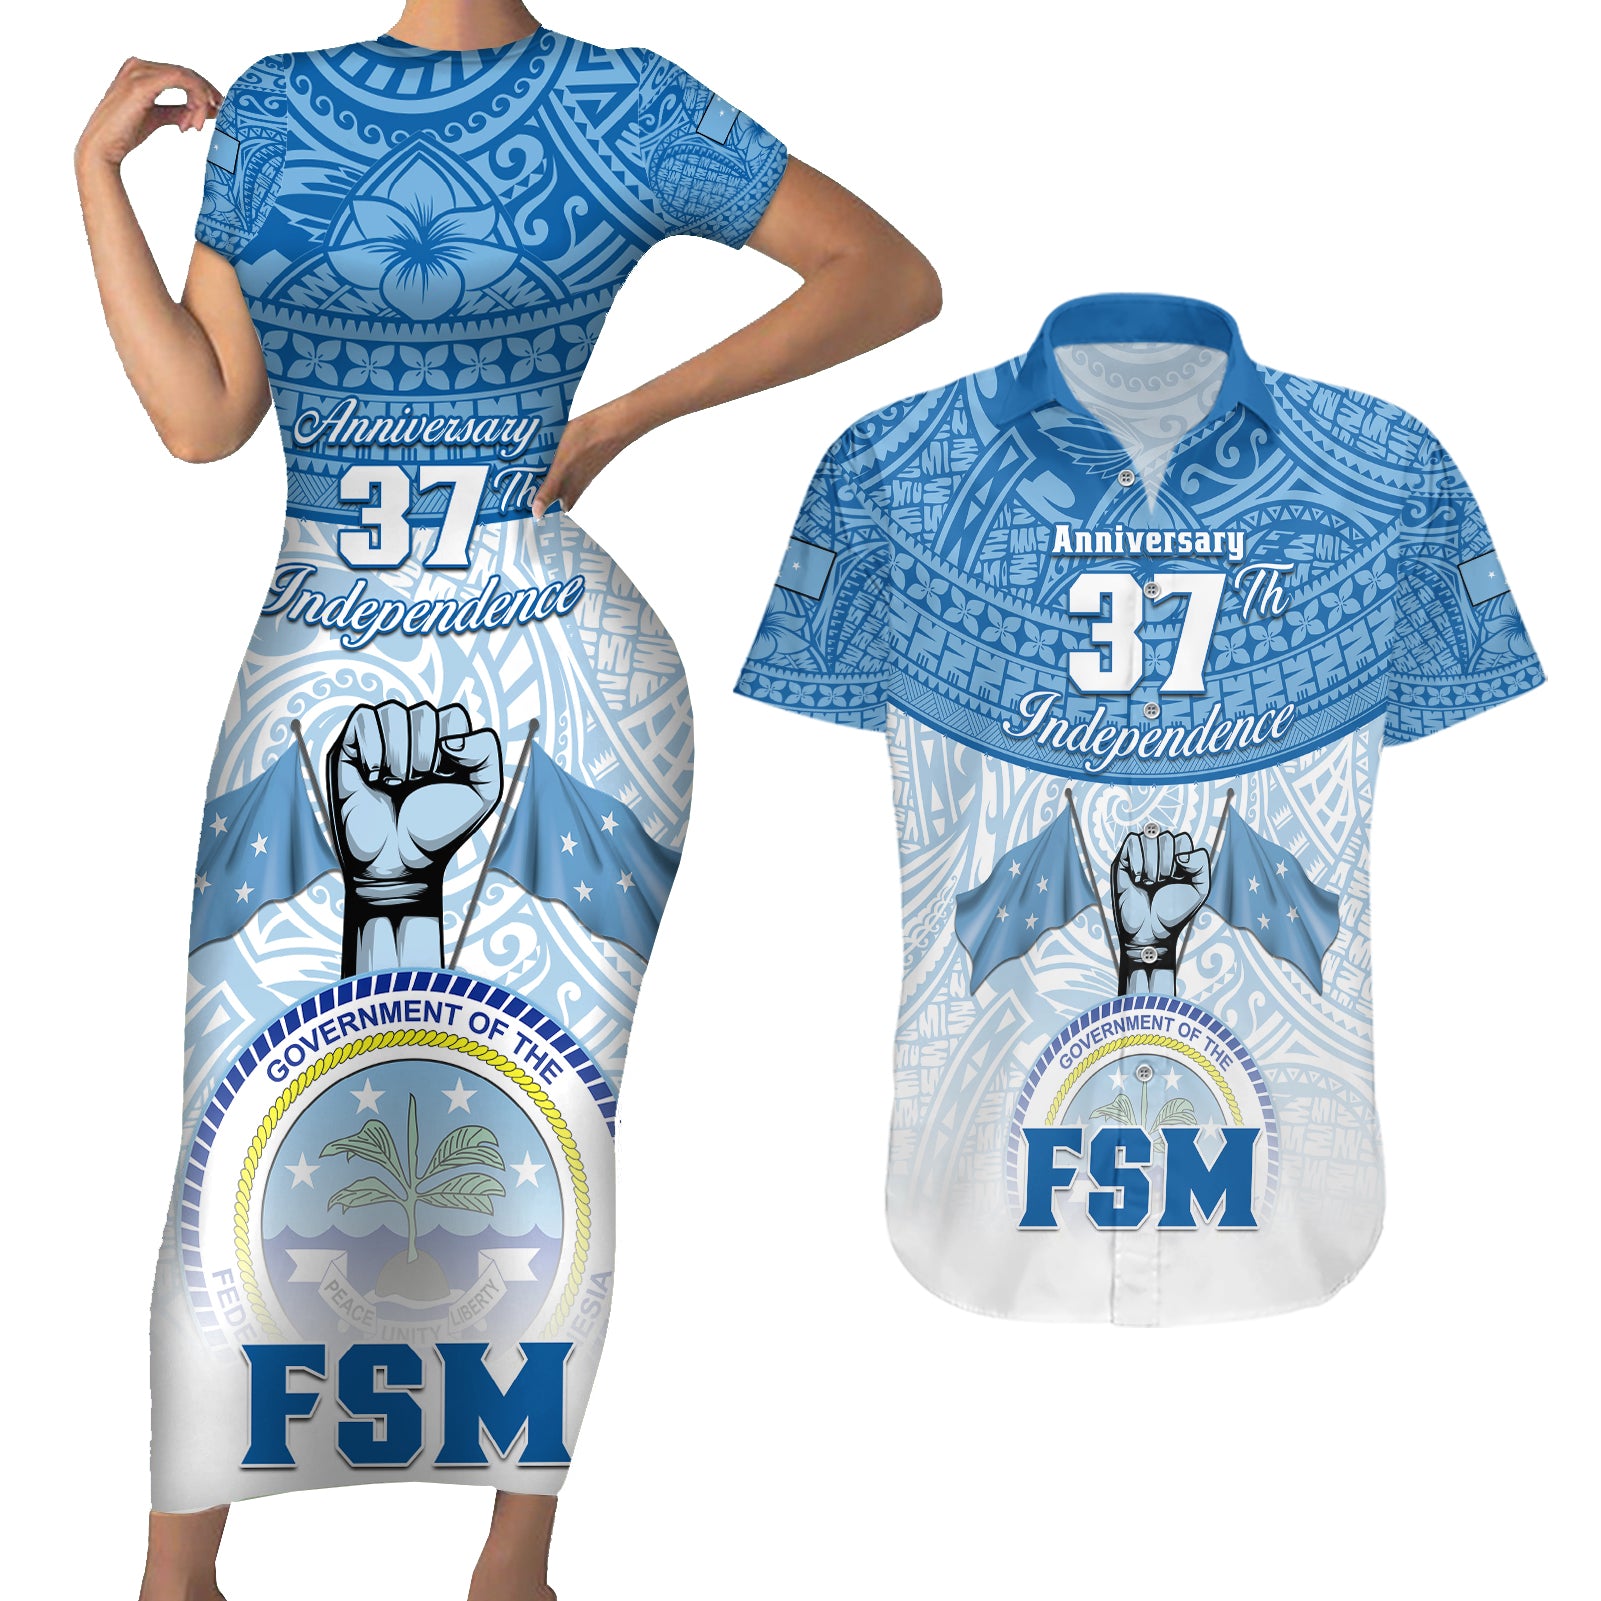 personalized-federated-states-of-micronesia-couples-matching-short-sleeve-bodycon-dress-and-hawaiian-shirt-happy-37th-independence-anniversary